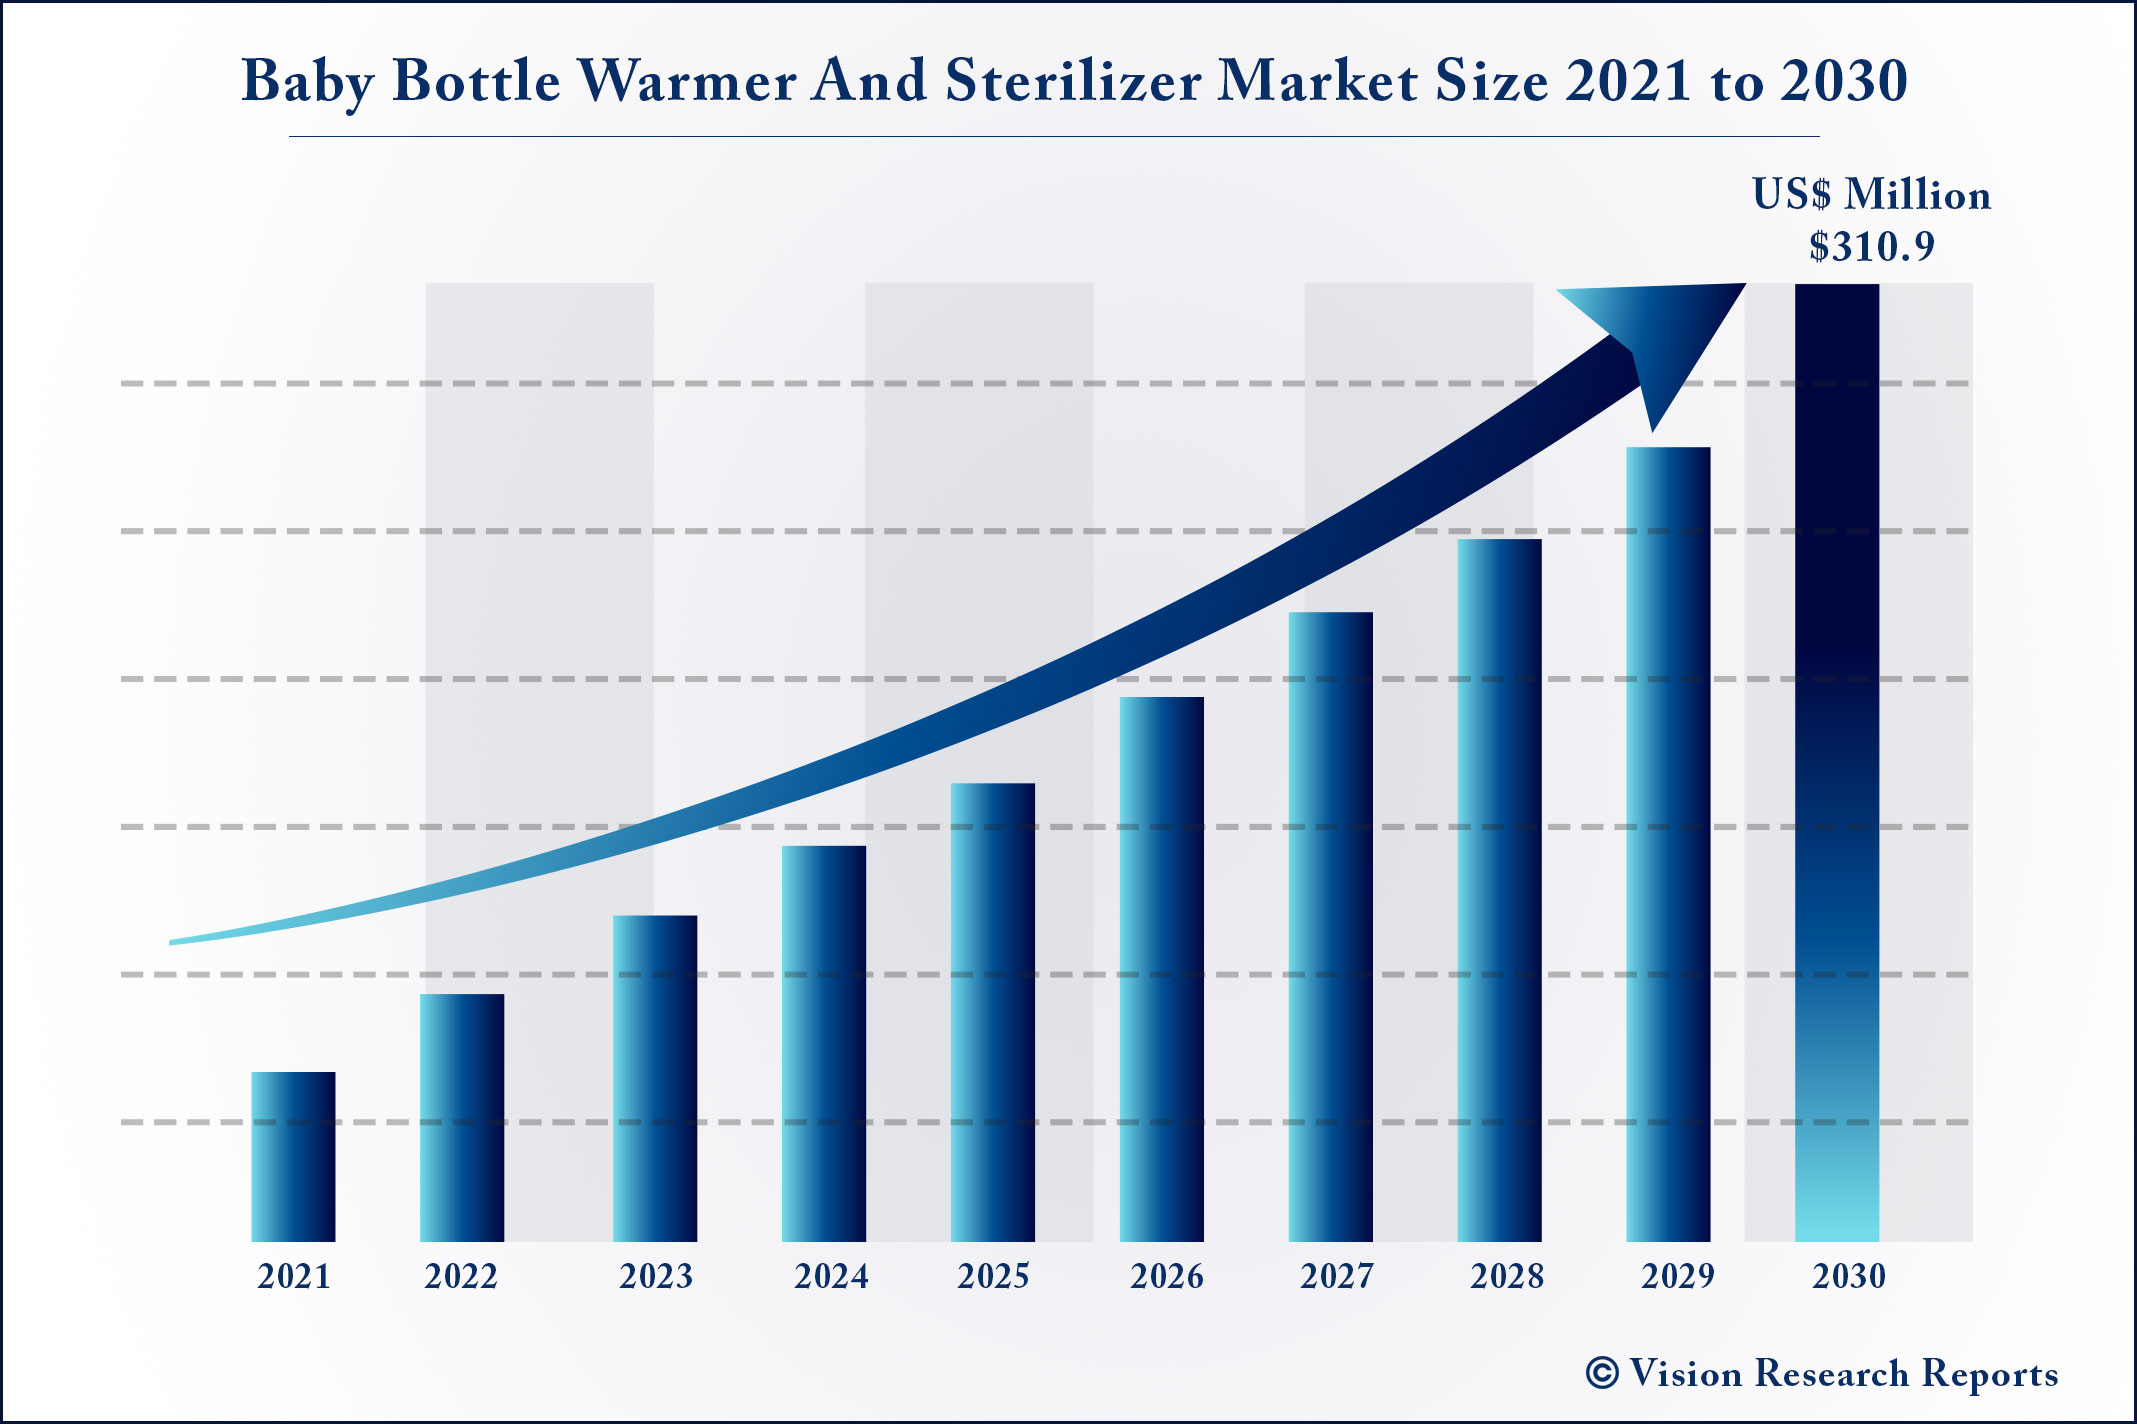 Baby Bottle Warmer And Sterilizer Market Size 2021 to 2030